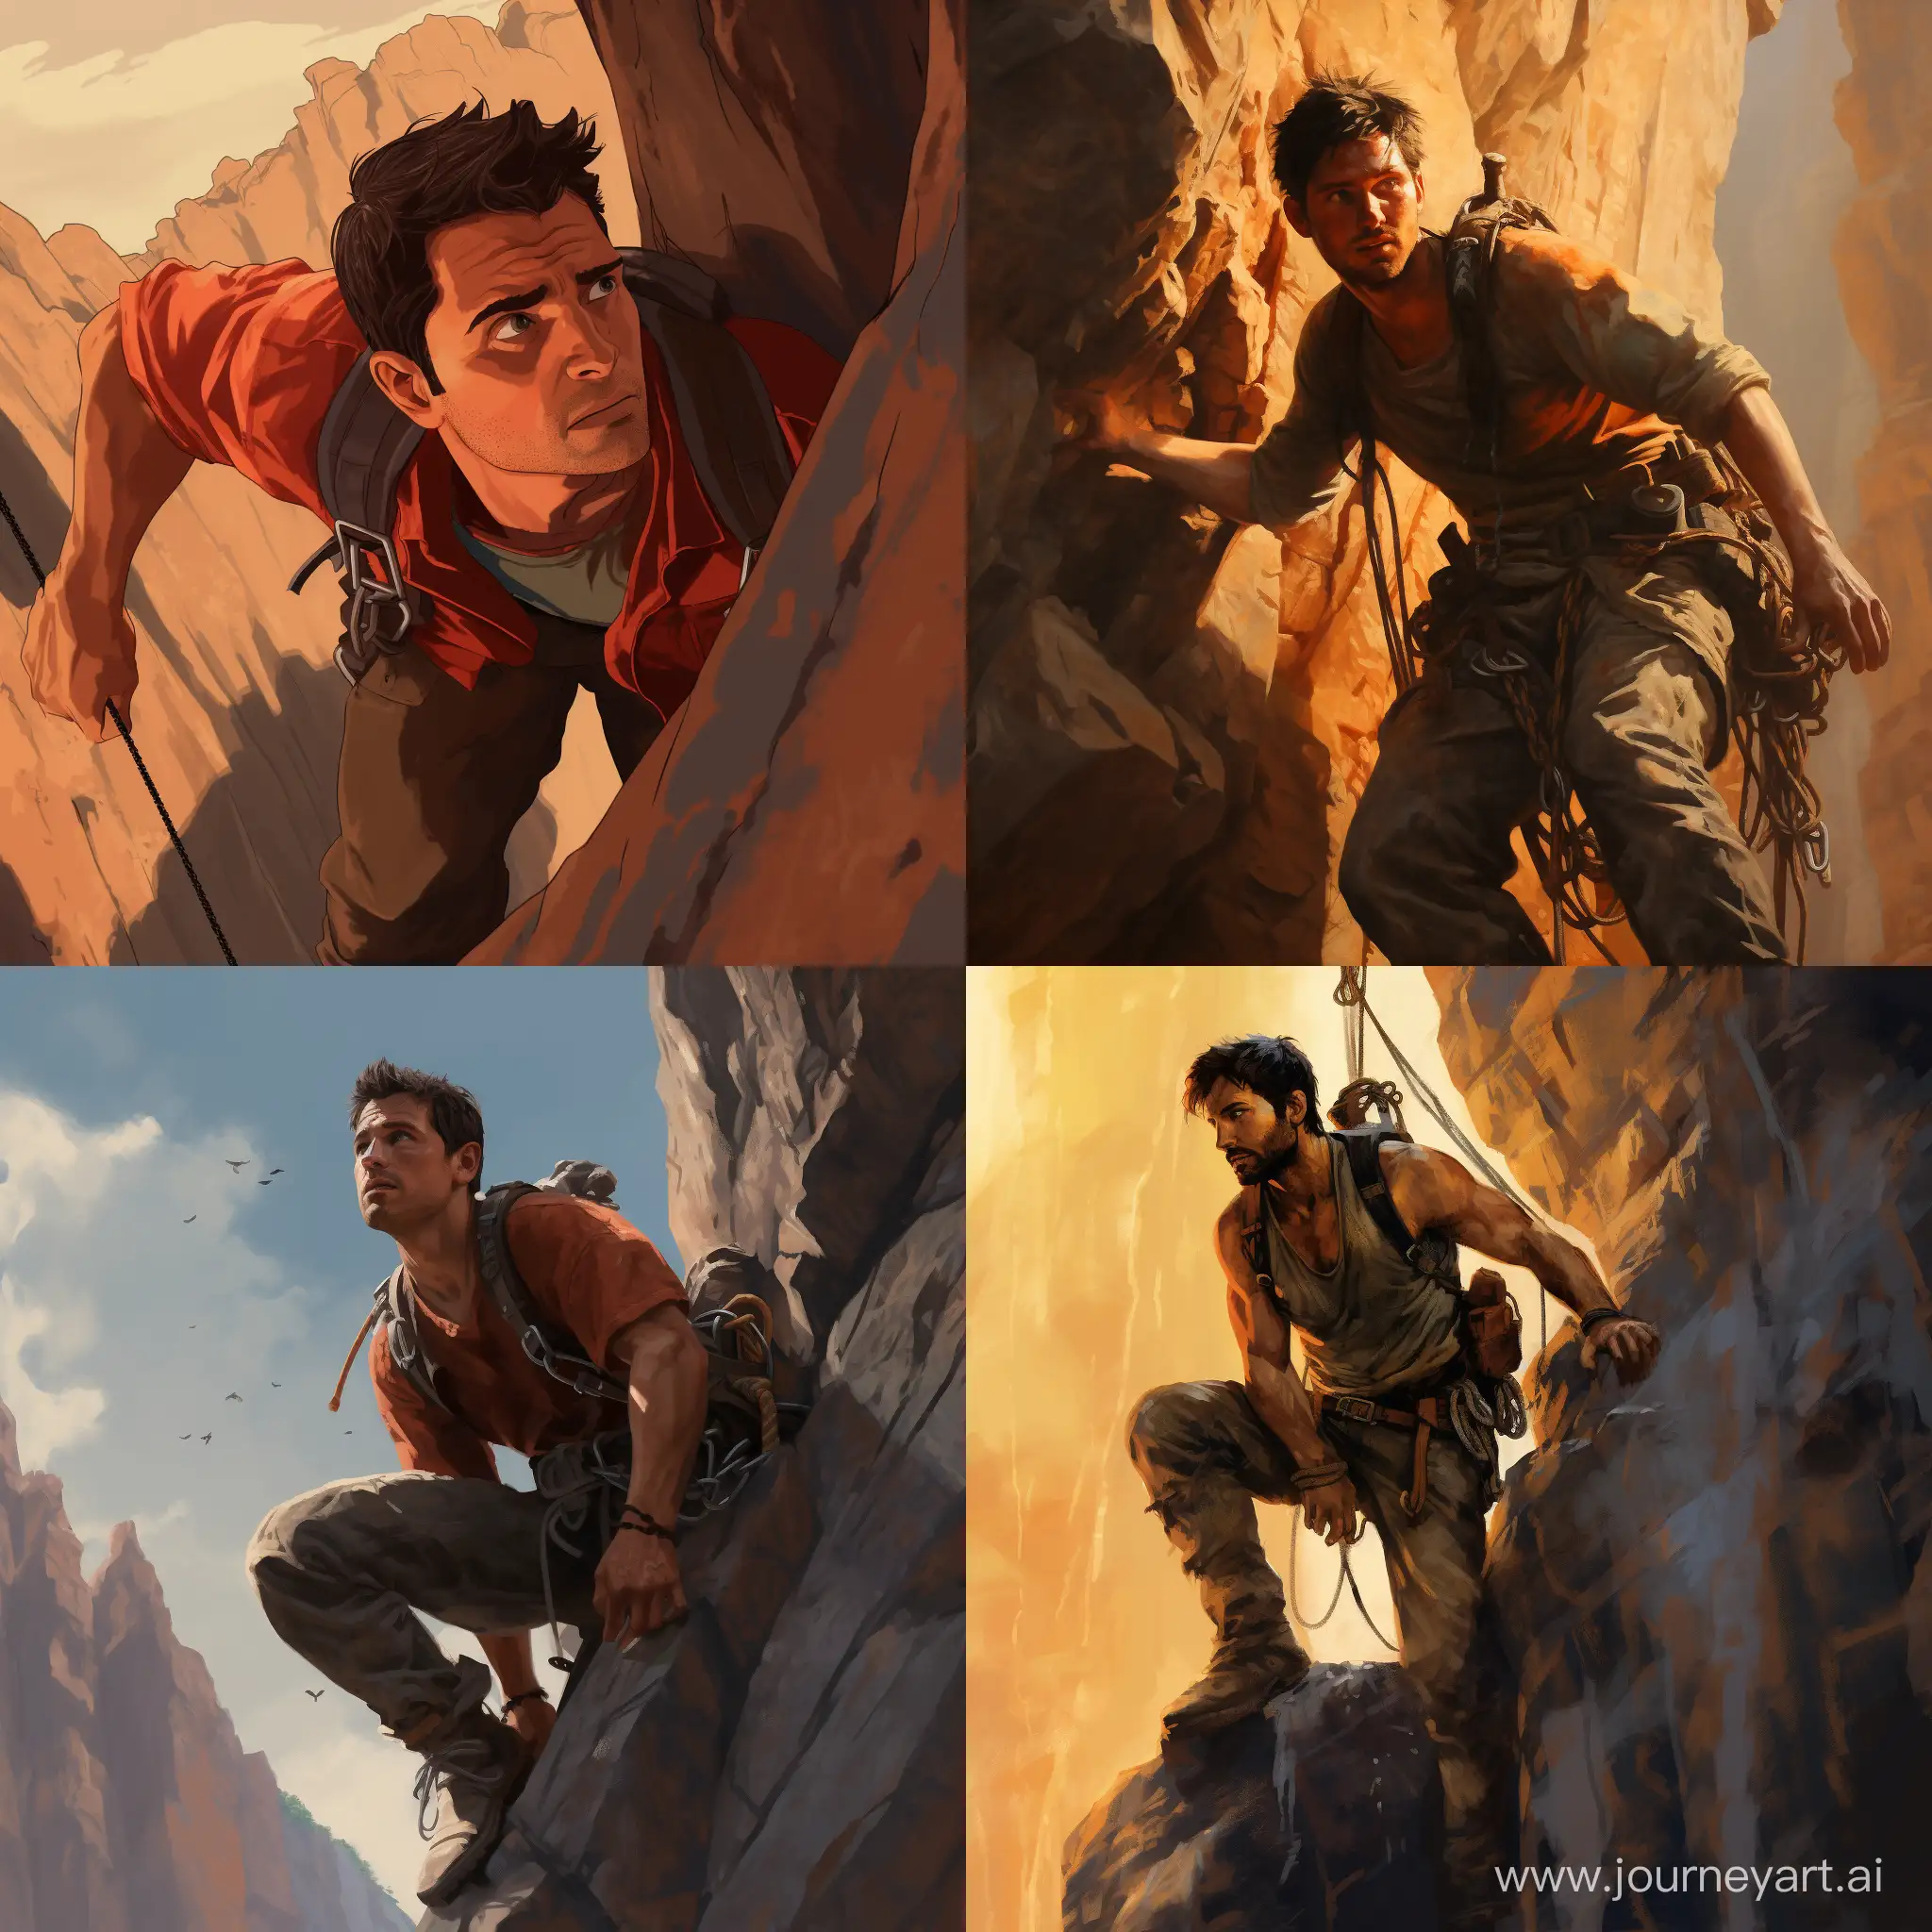 Courageous-Confrontation-Jake-Overcoming-Fear-on-Rugged-Mountain-Cliff